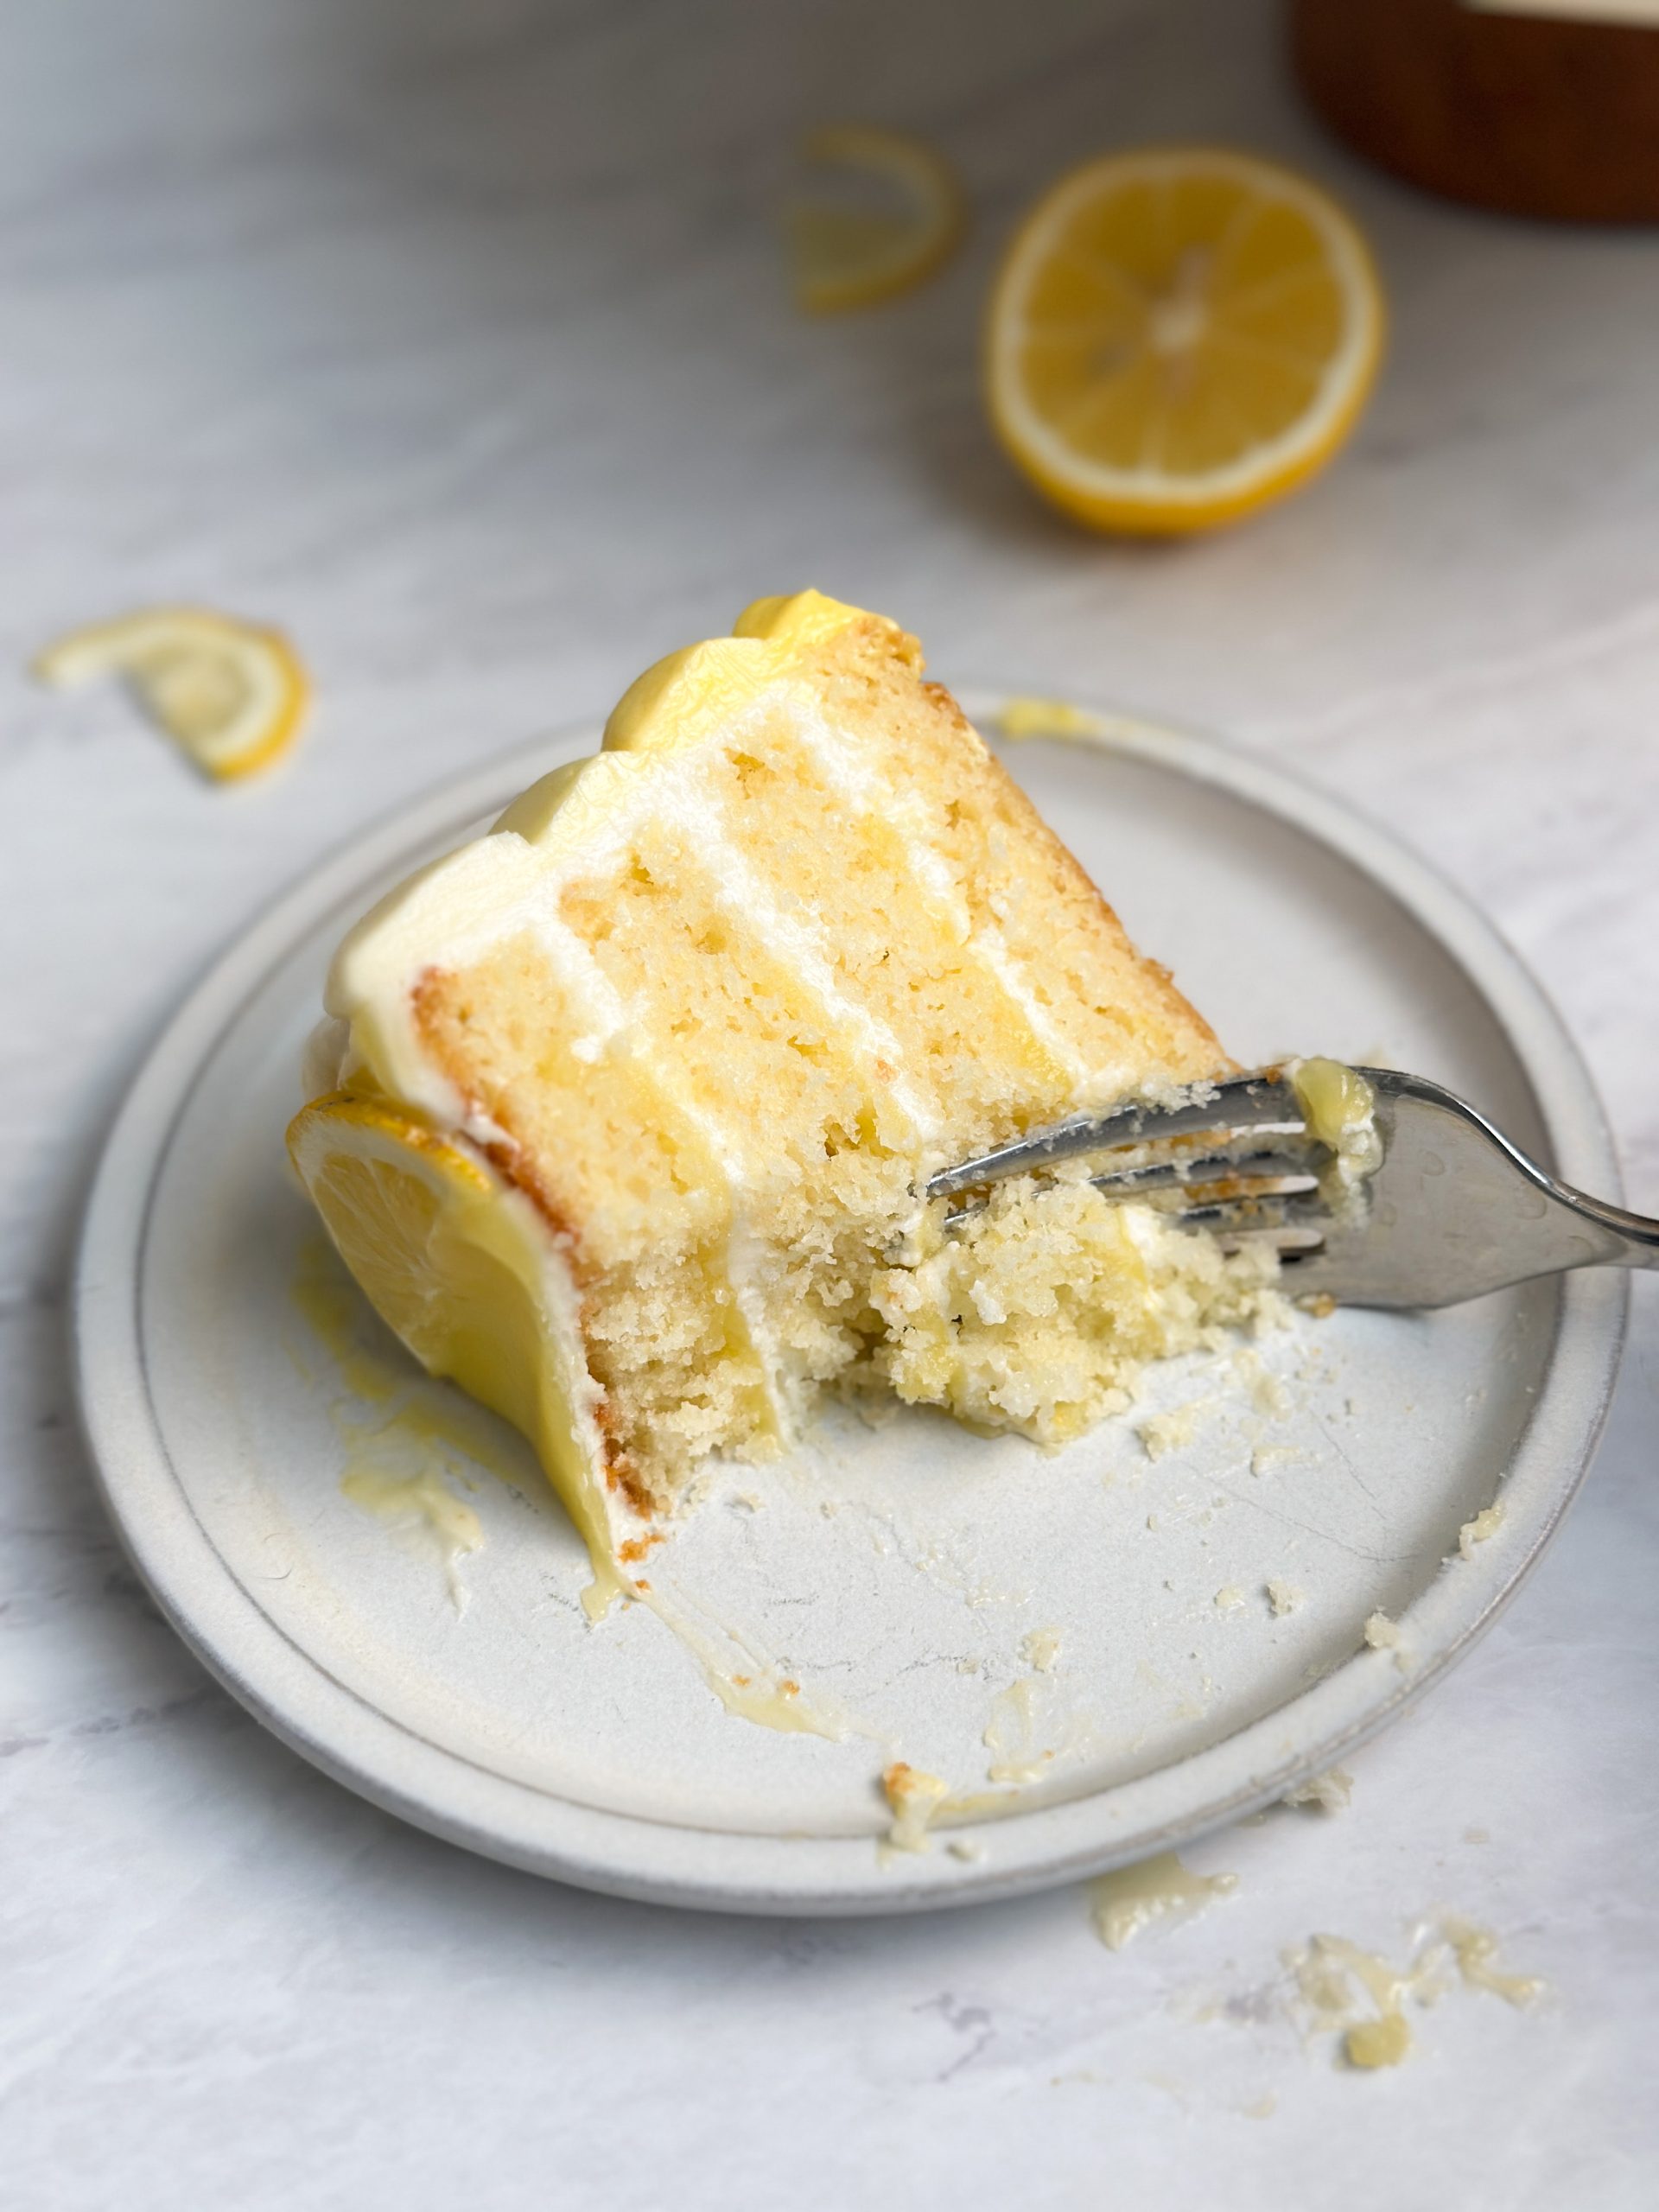 slice of lemon cake on a small plate with a fork taking out a bite